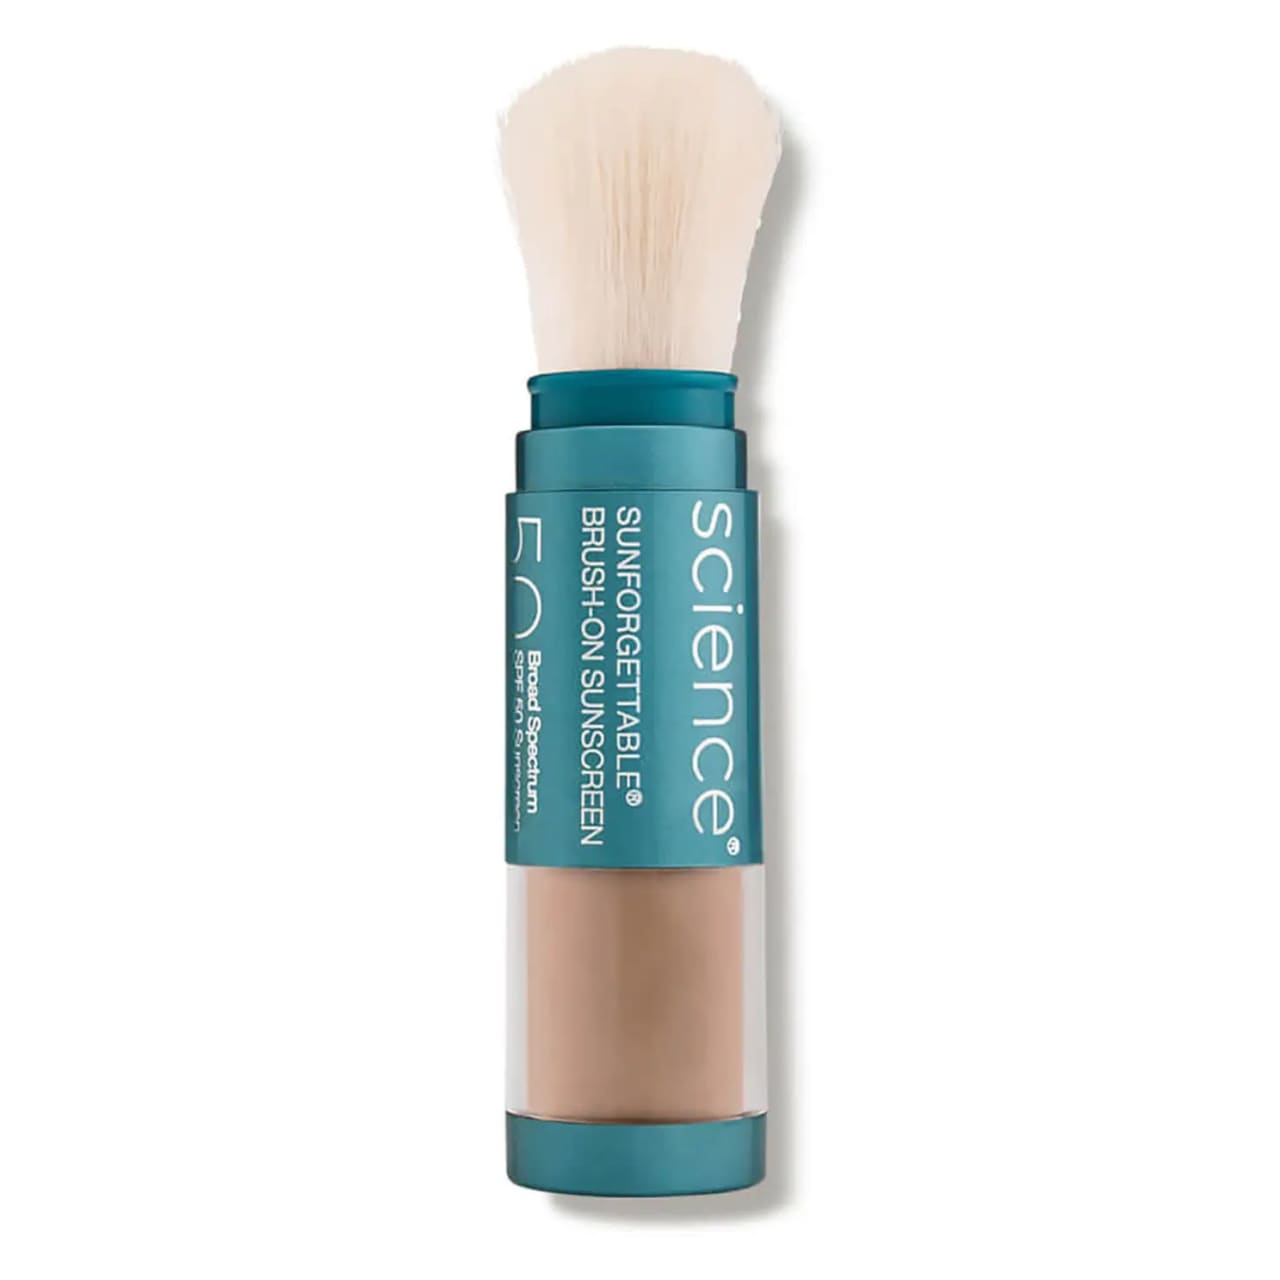 Sunforgettable Total Protection Brush-On Sunscreen